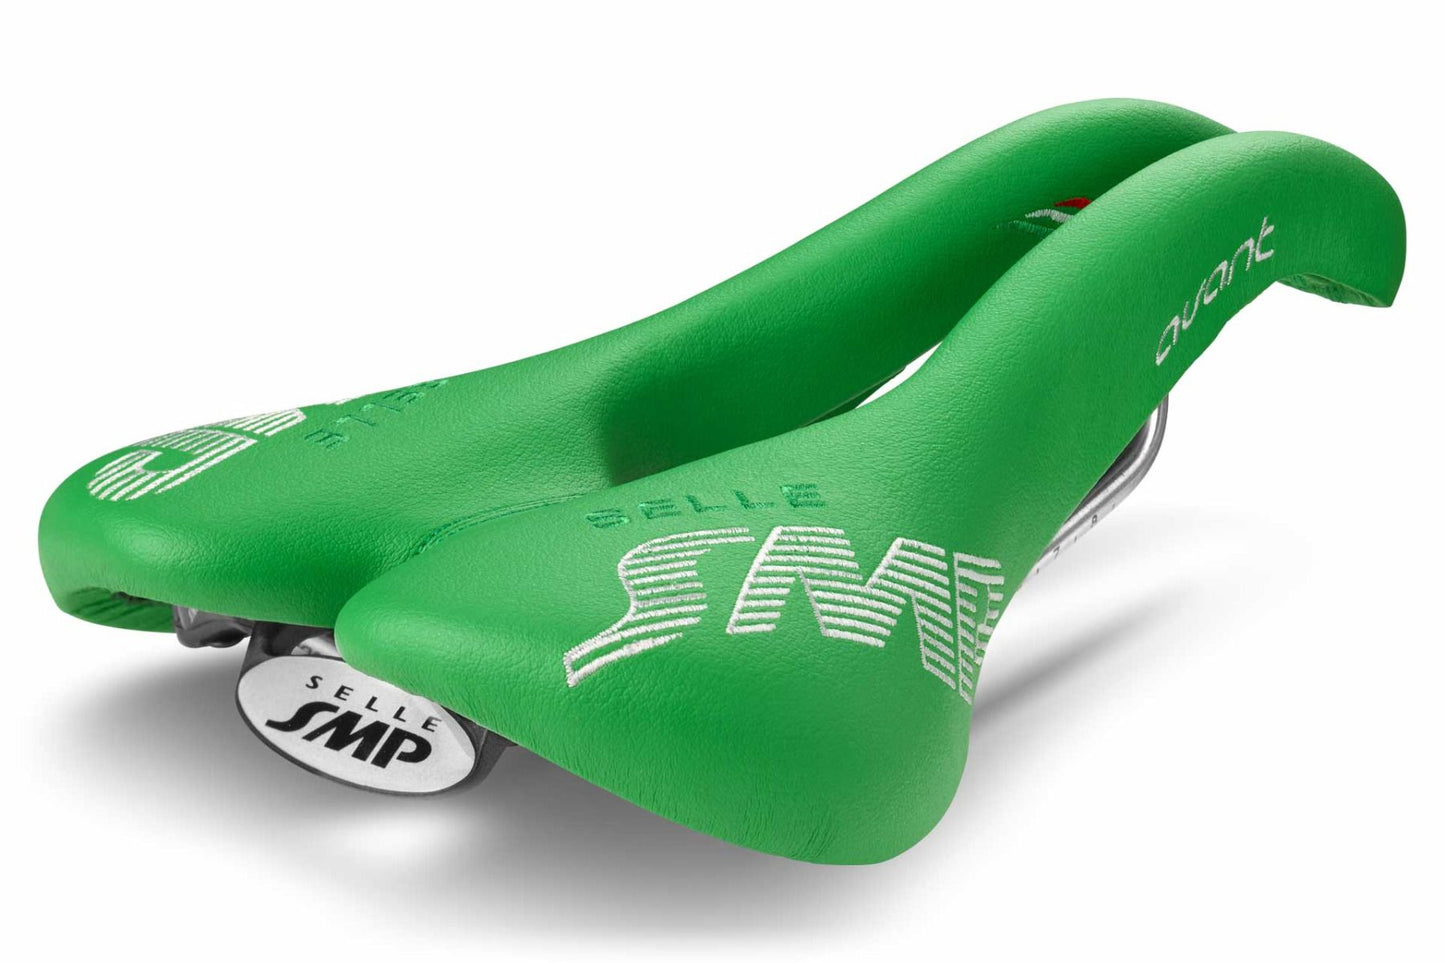 Selle SMP Avant Saddle with Stainless Steel Rails (Green)